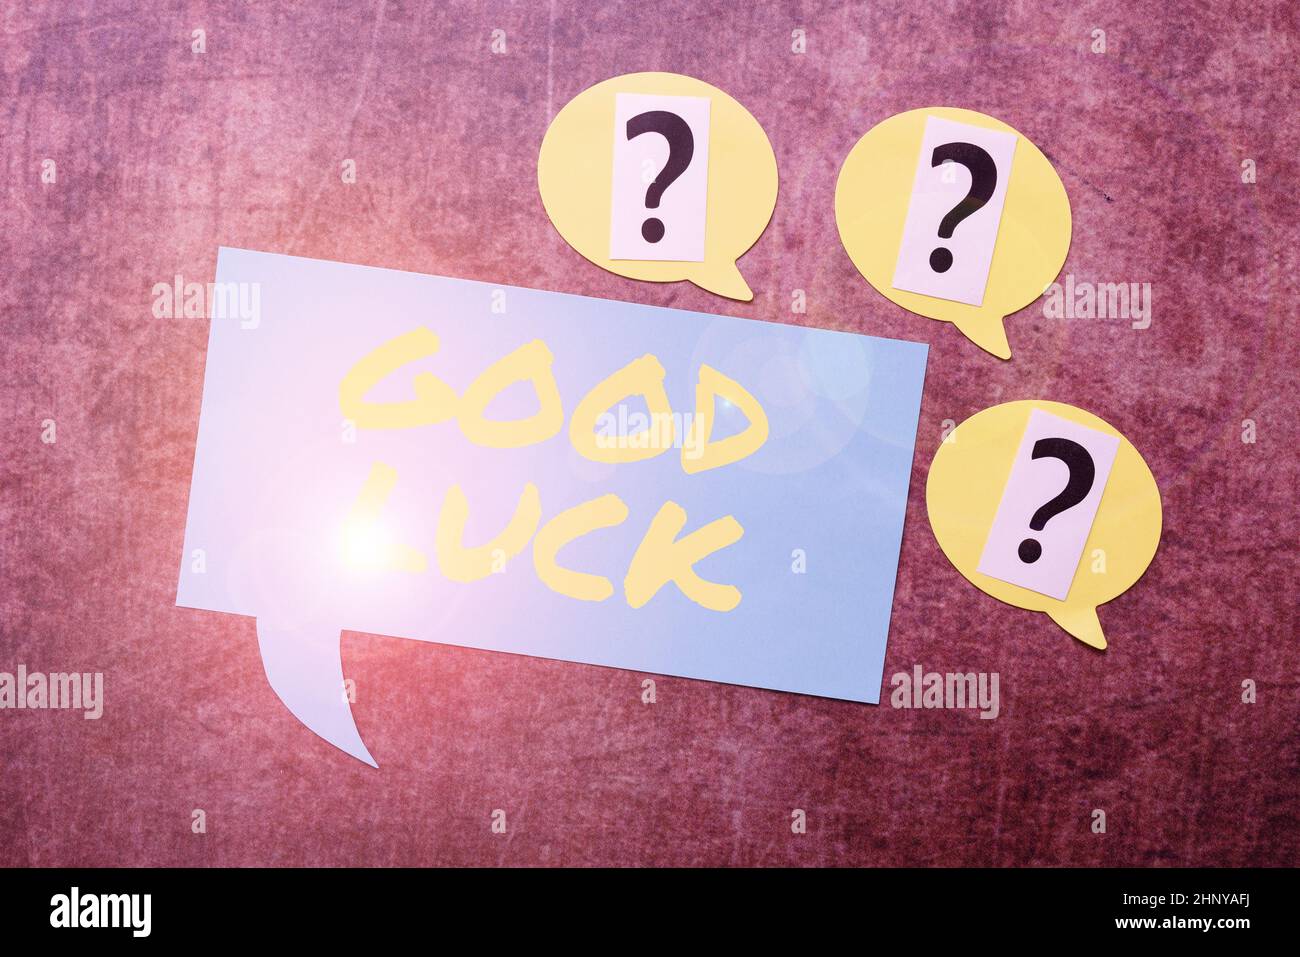 Hand writing sign Good Luck, Internet Concept wish a positive fortune or a happy outcome that a person can have Questioning Uncertain Thoughts, Discus Stock Photo